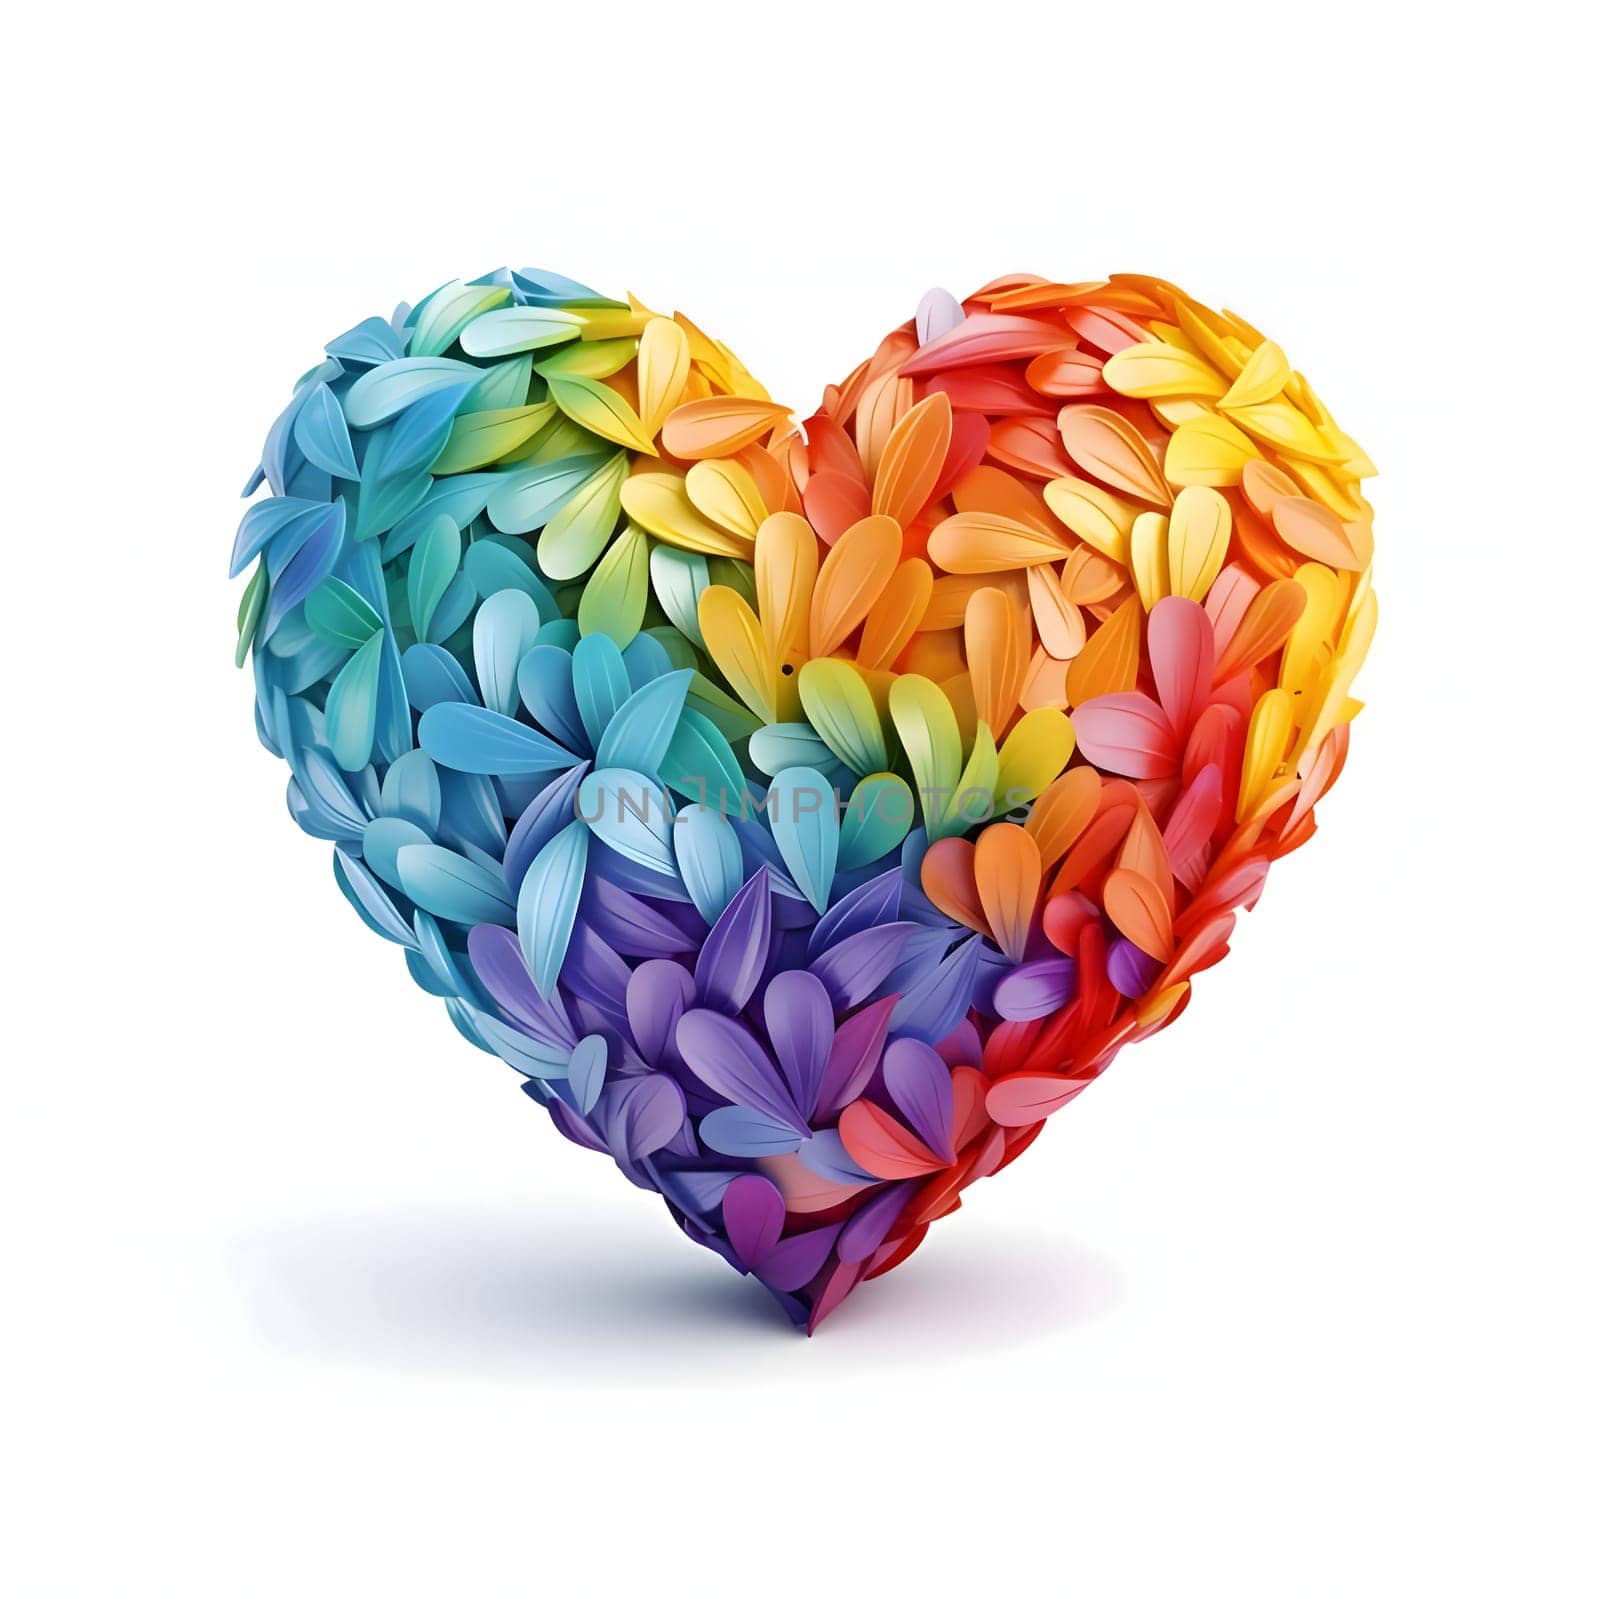 Colorful rainbow heart with white flower petals, isolated background. Heart as a symbol of affection and love. by ThemesS